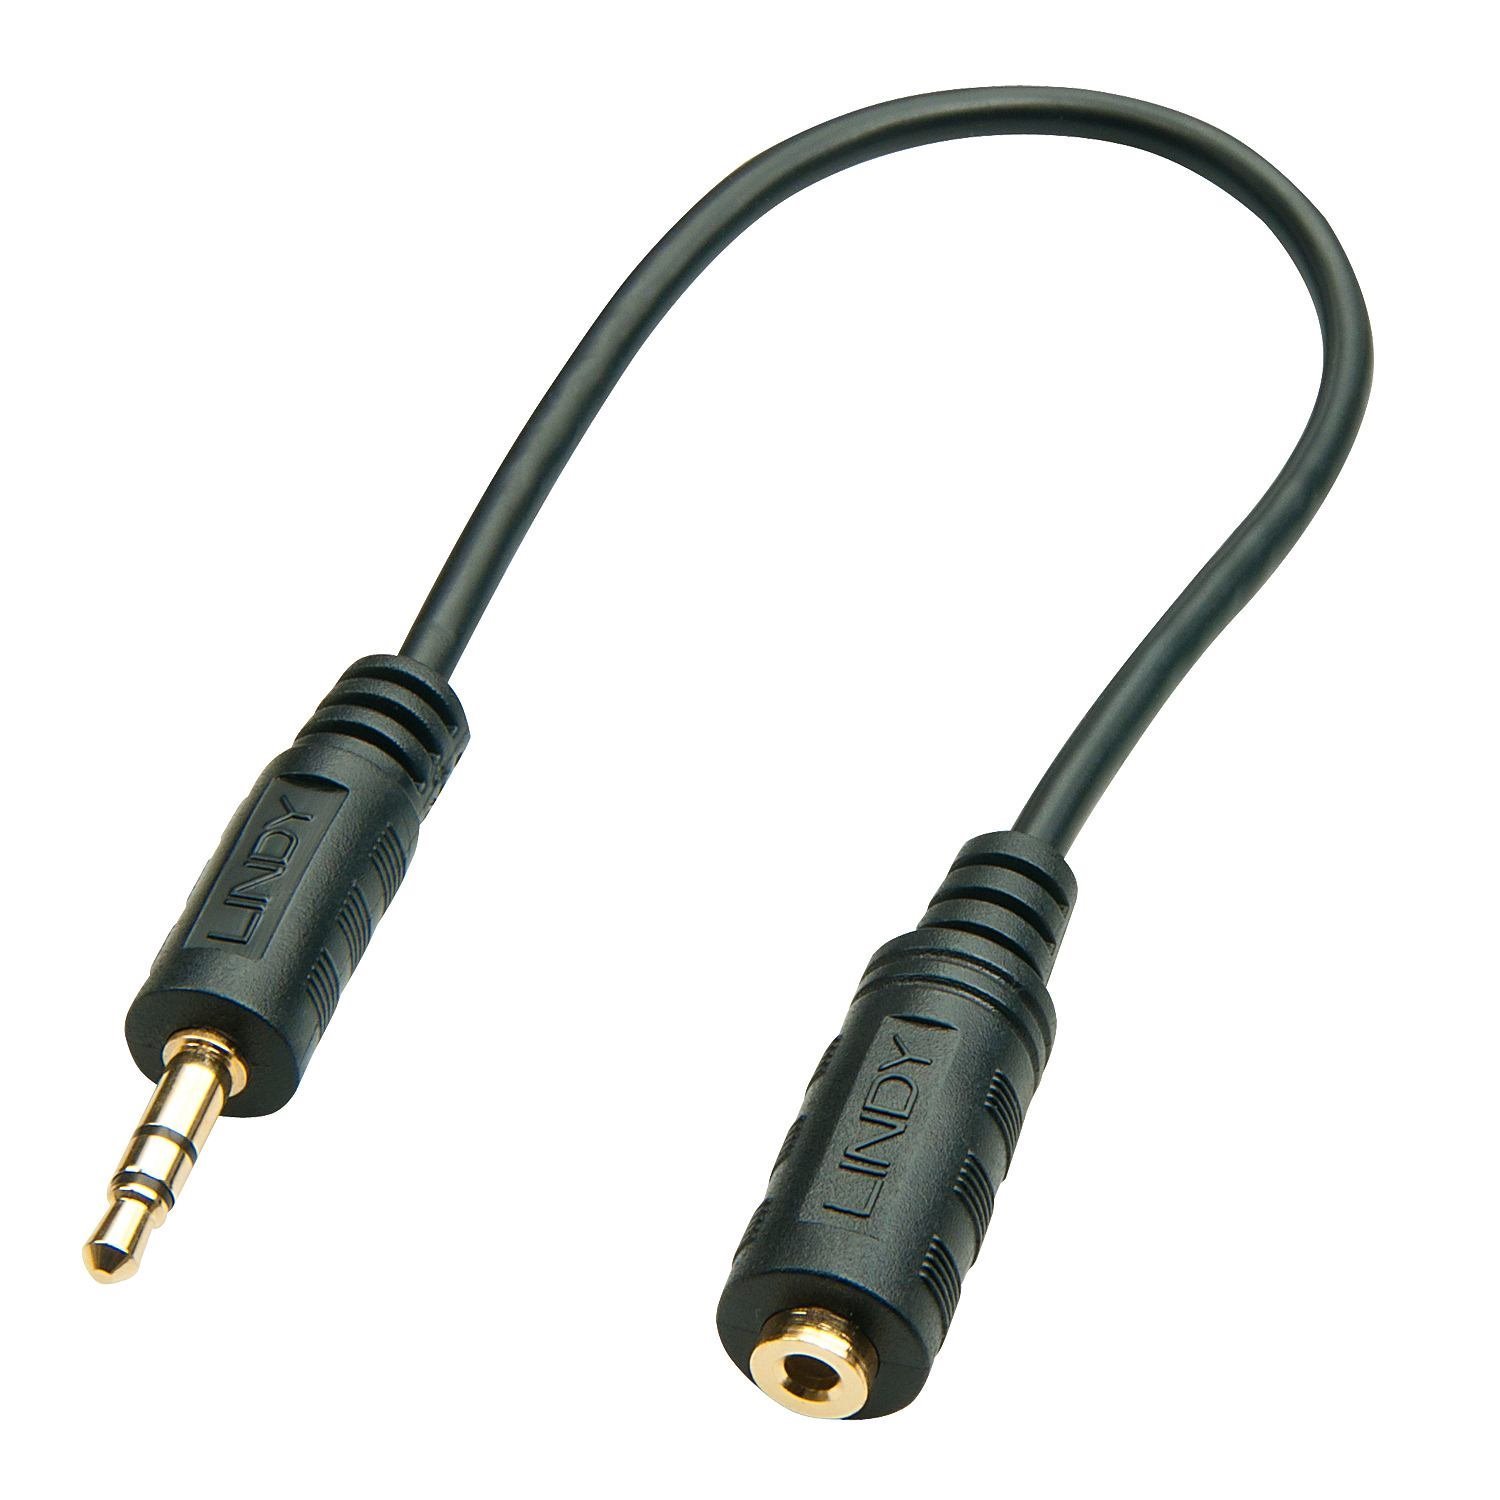 Lindy Audio Adapter Cable 3 5 M/2 5F (3.5MM Male To 2.5MM Female - Audio Adapter)